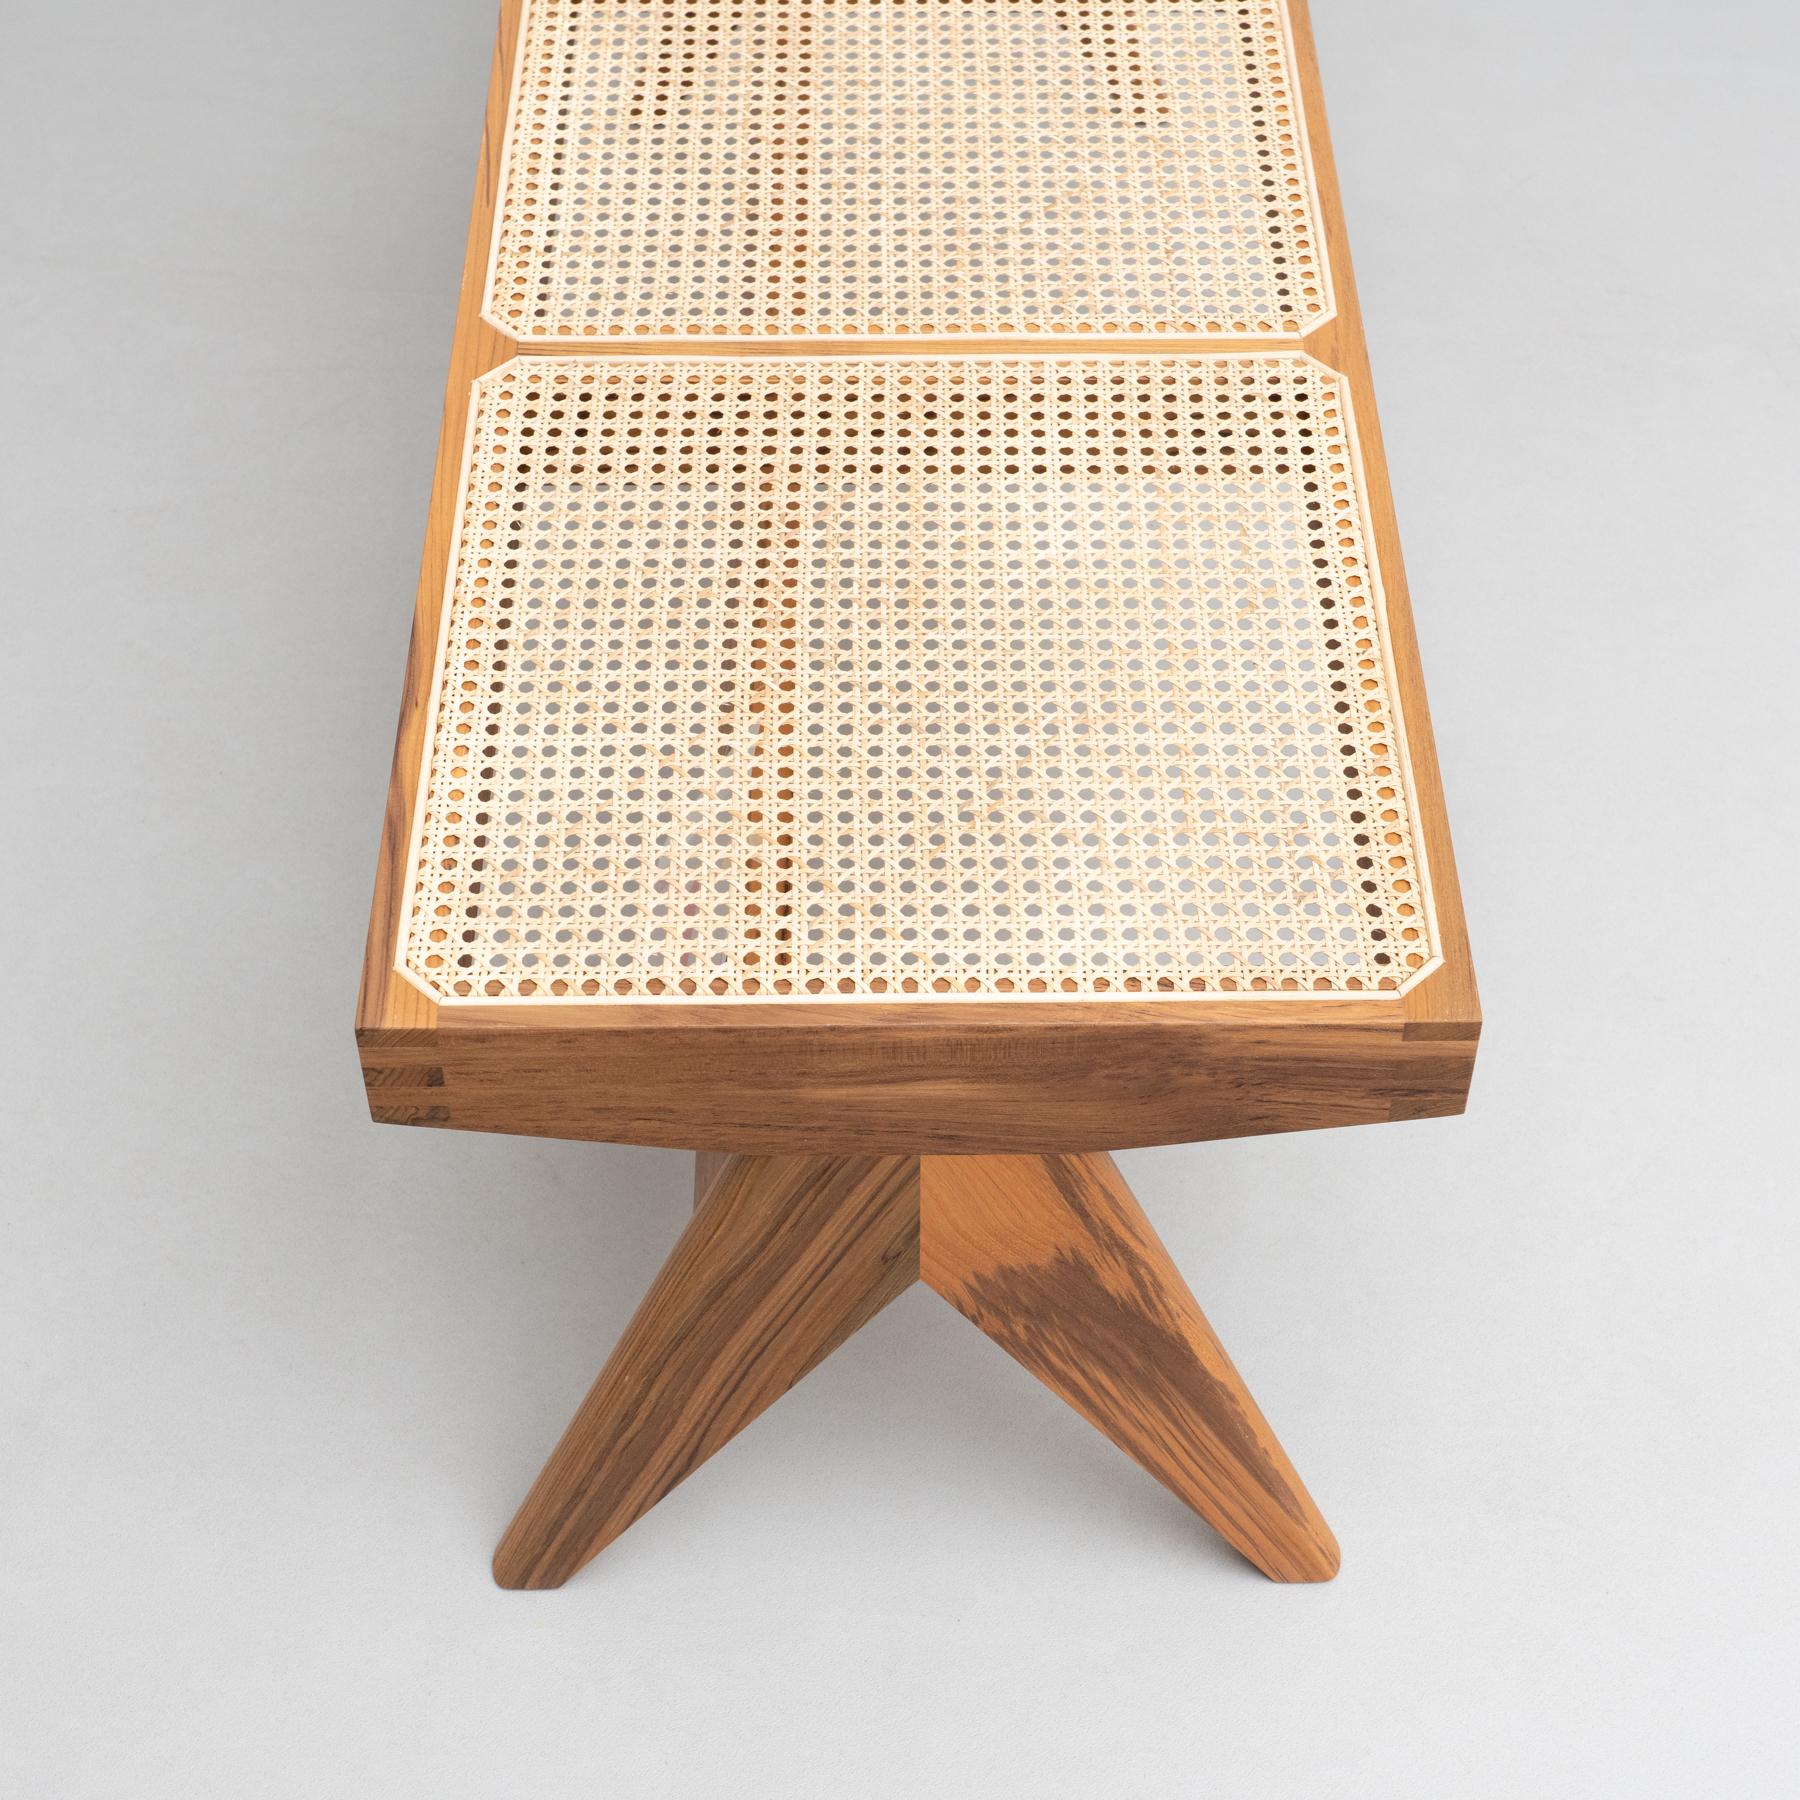 Pierre Jeanneret 057 Civil Bench, Wood and Woven Viennese Cane For Sale 8